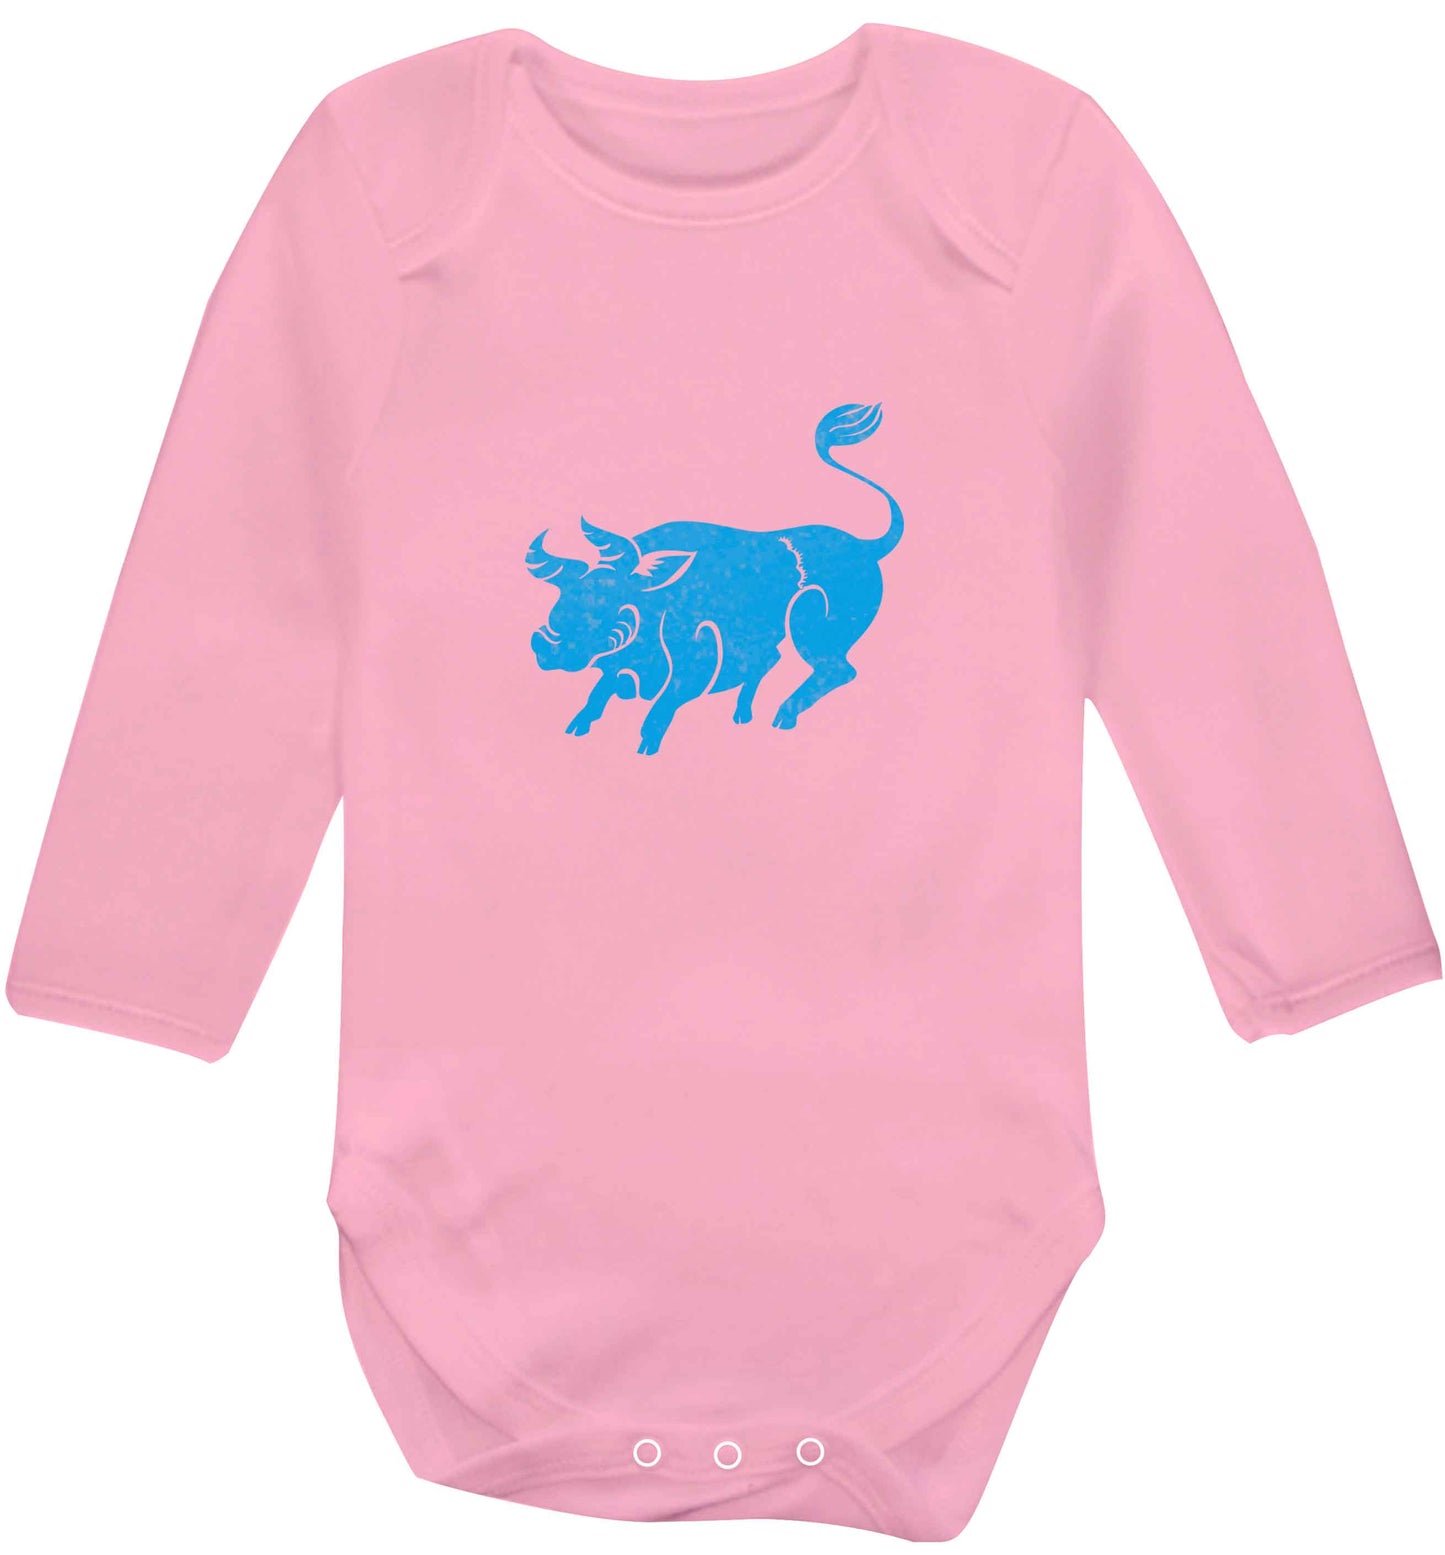 Blue ox baby vest long sleeved pale pink 6-12 months